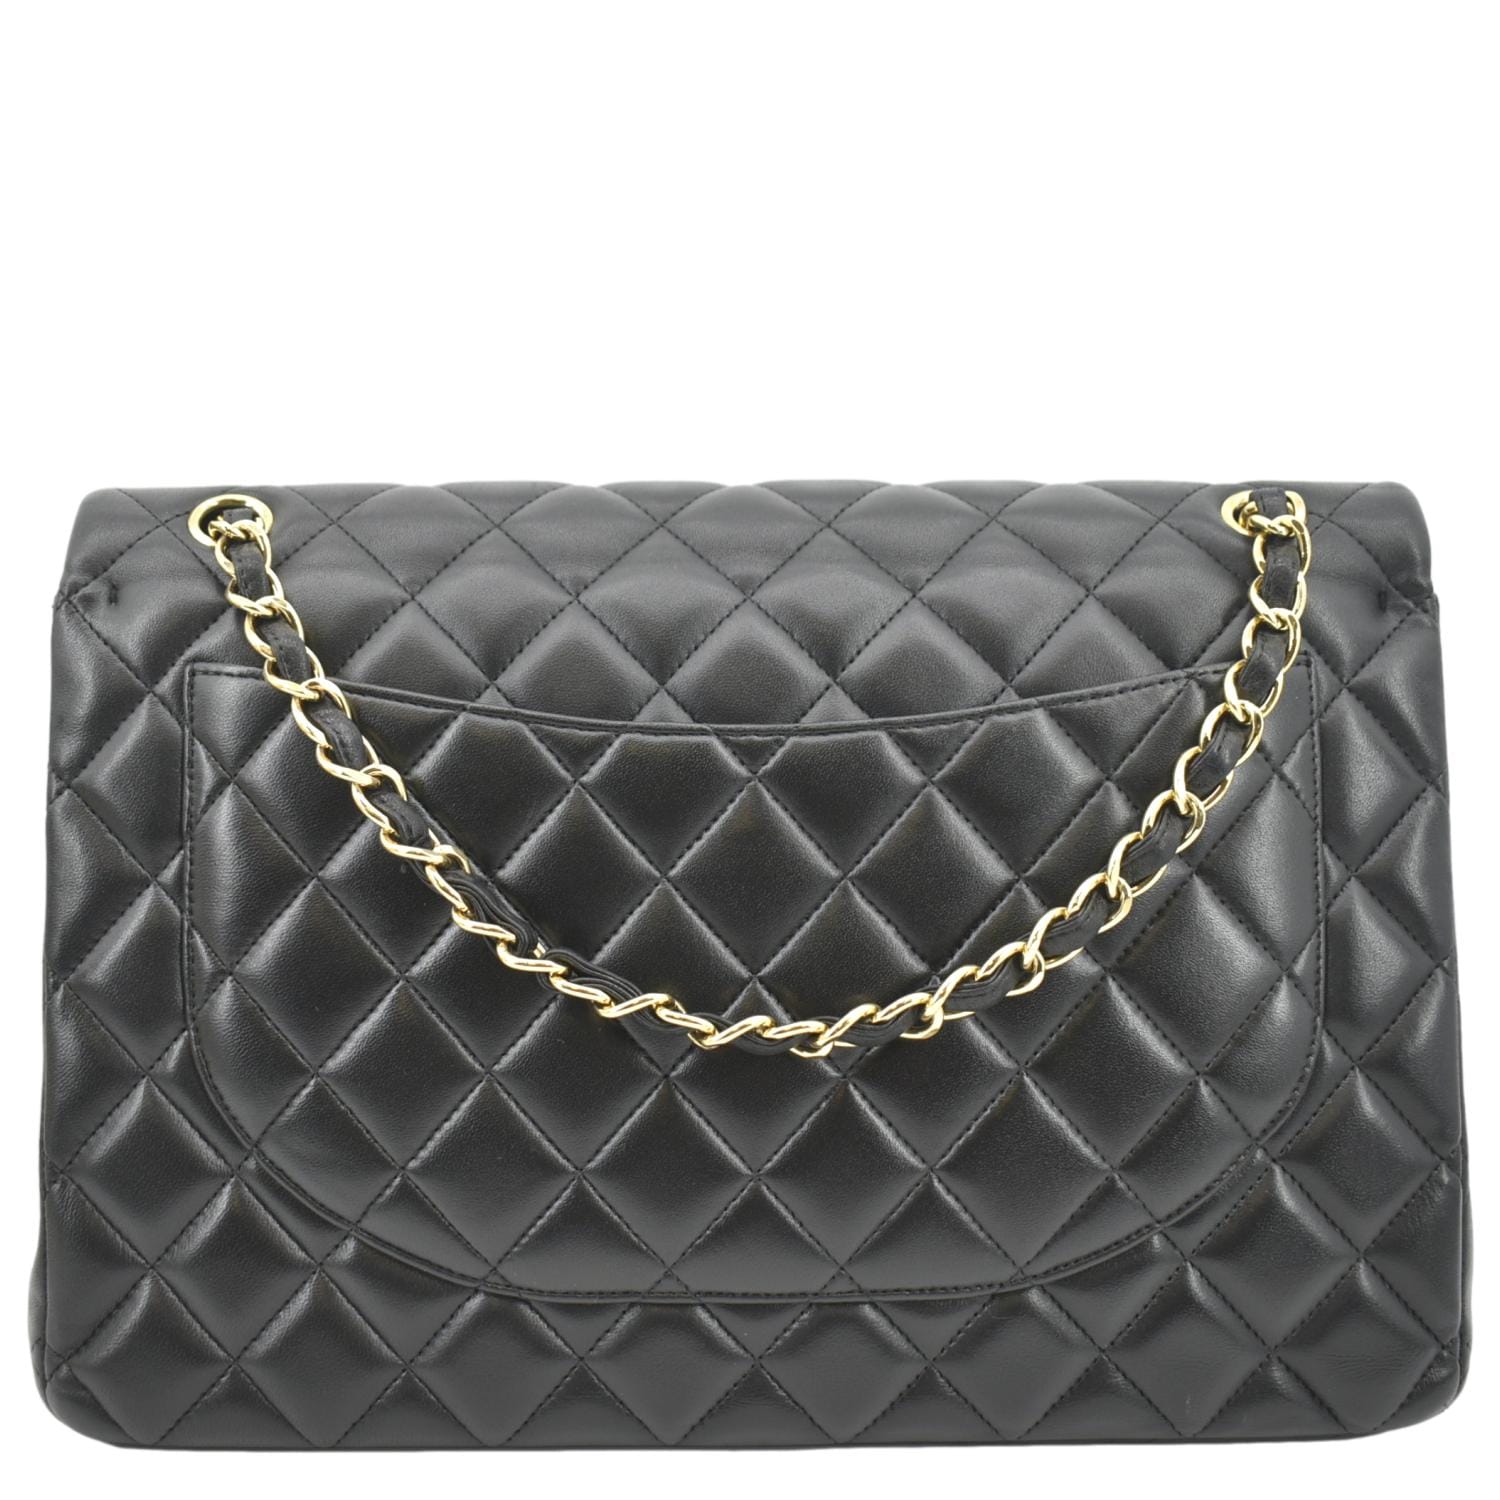 Pre-owned Chanel 2.55 Leather Handbag In Black